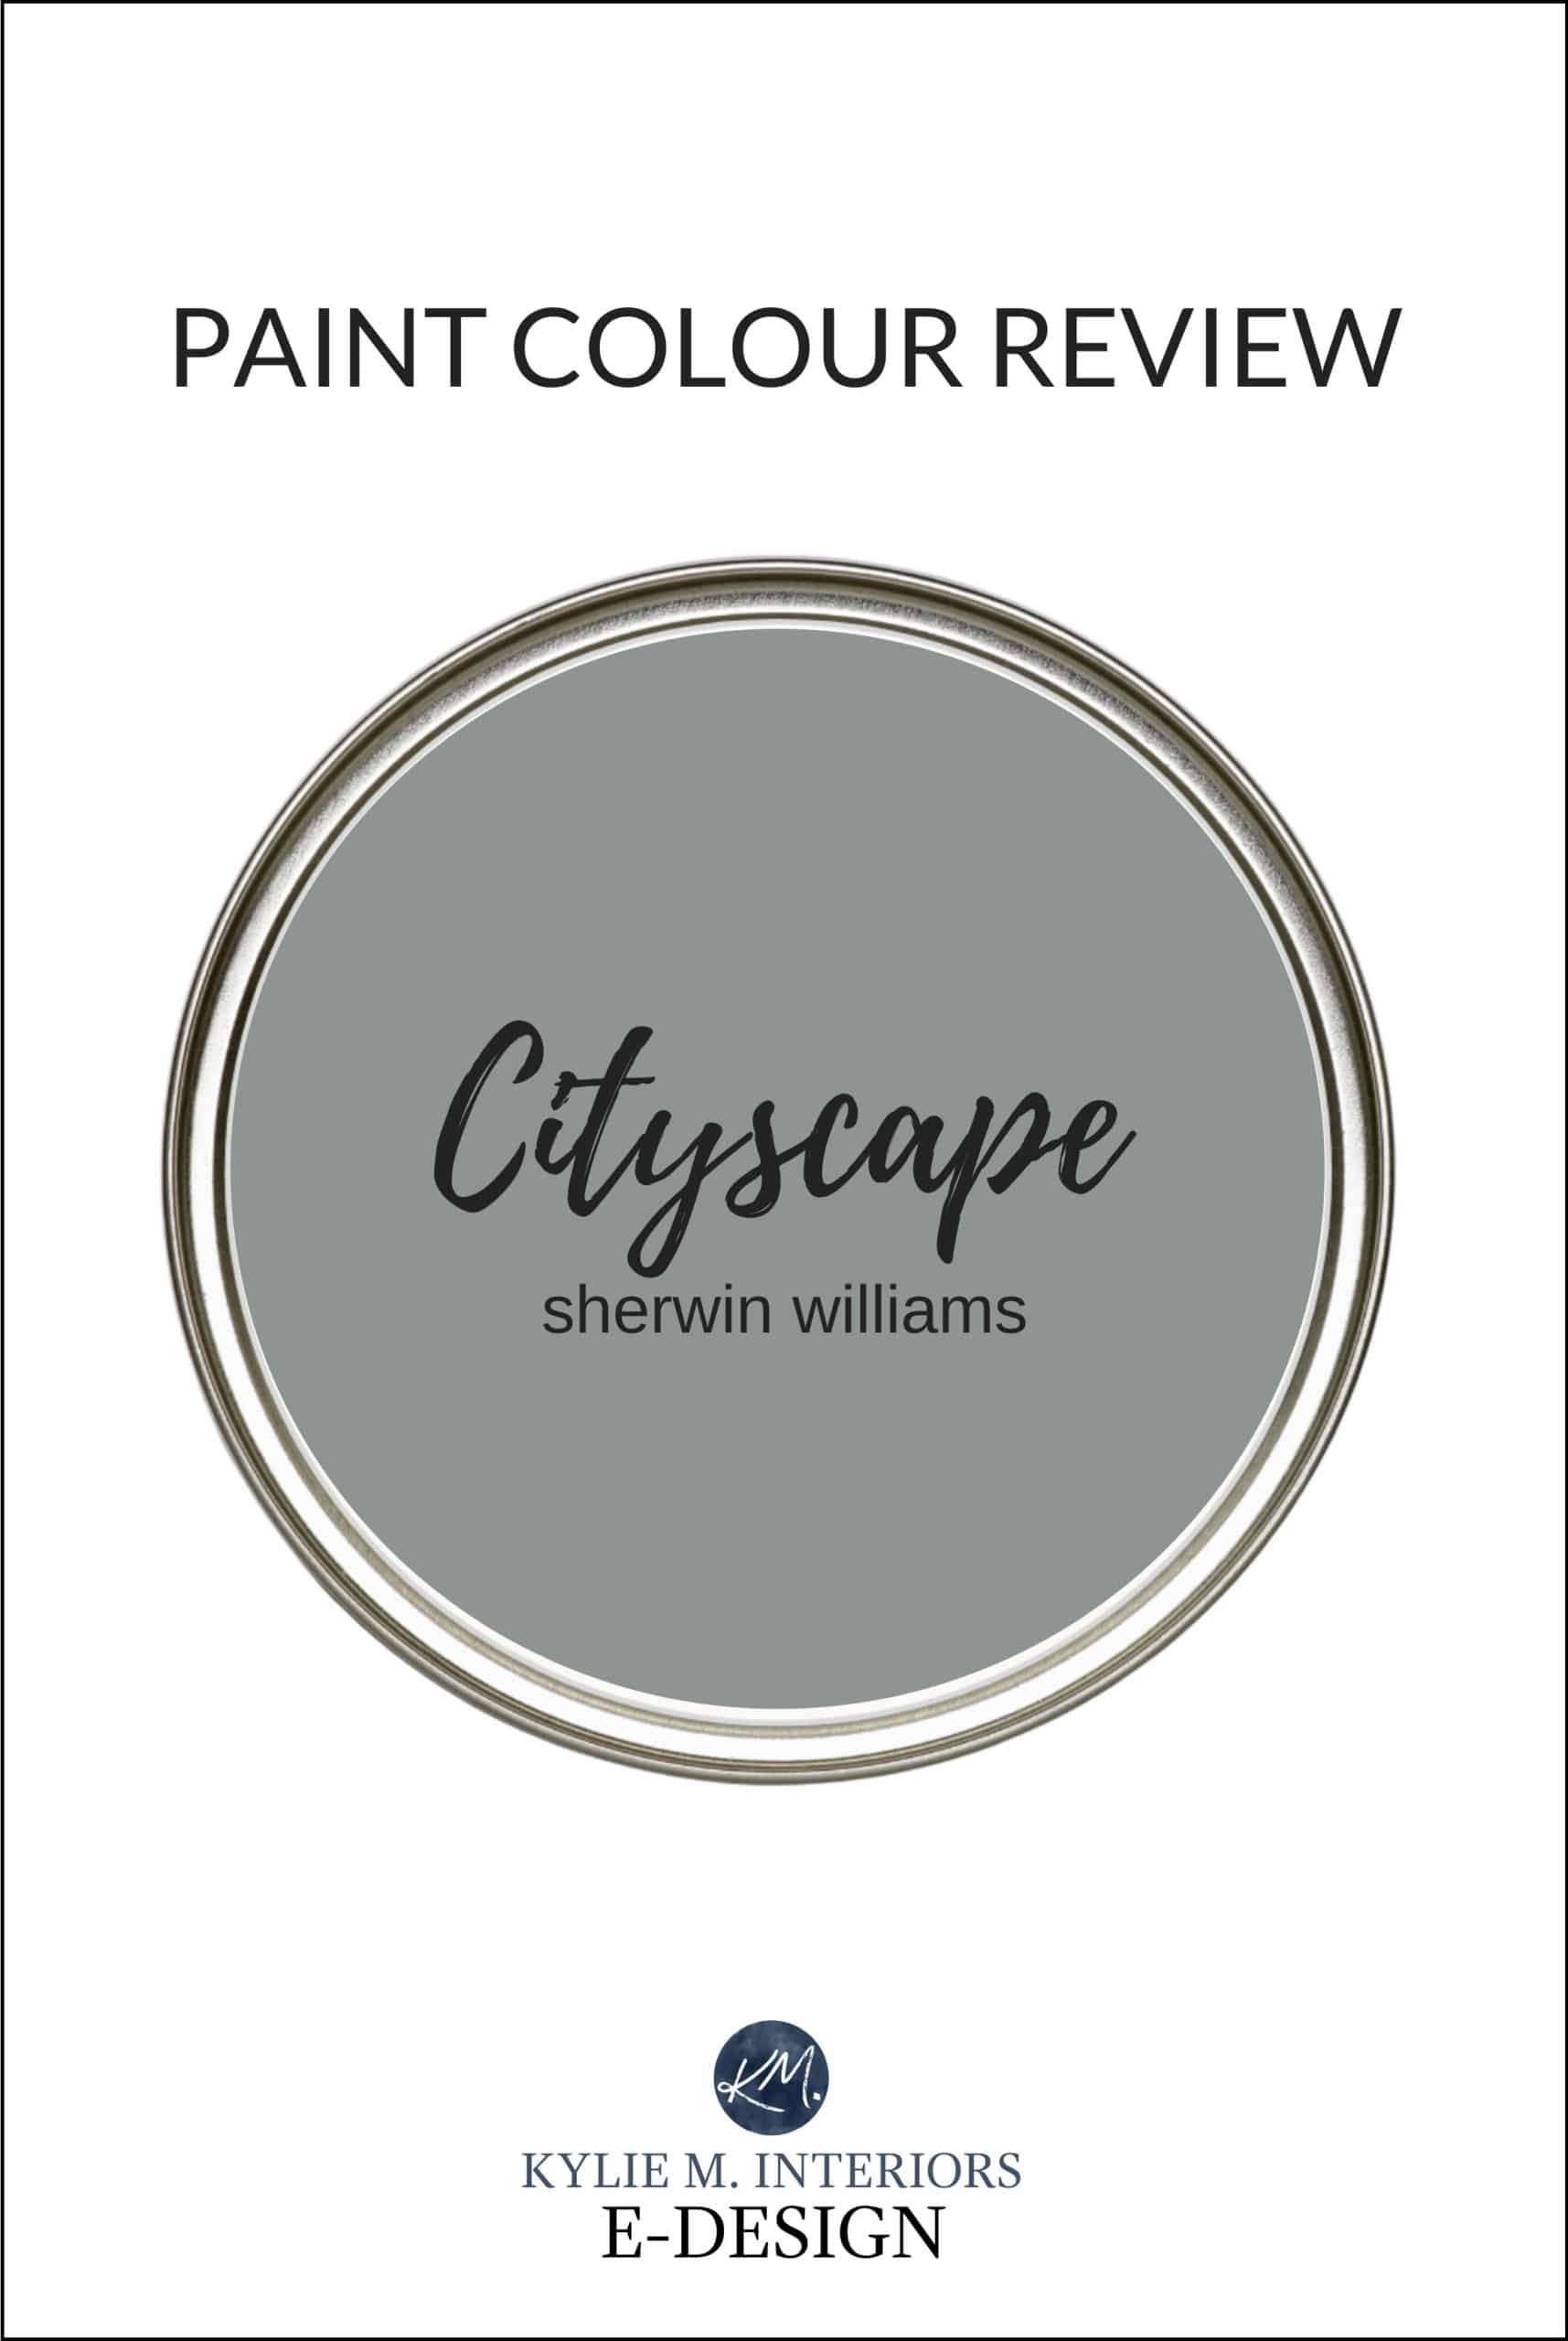 Paint colour review, Sherwin Williams Cityscape, best grey or charcoal paint color. Kylie M Interiors Edesign, online paint review and diy decorating advice